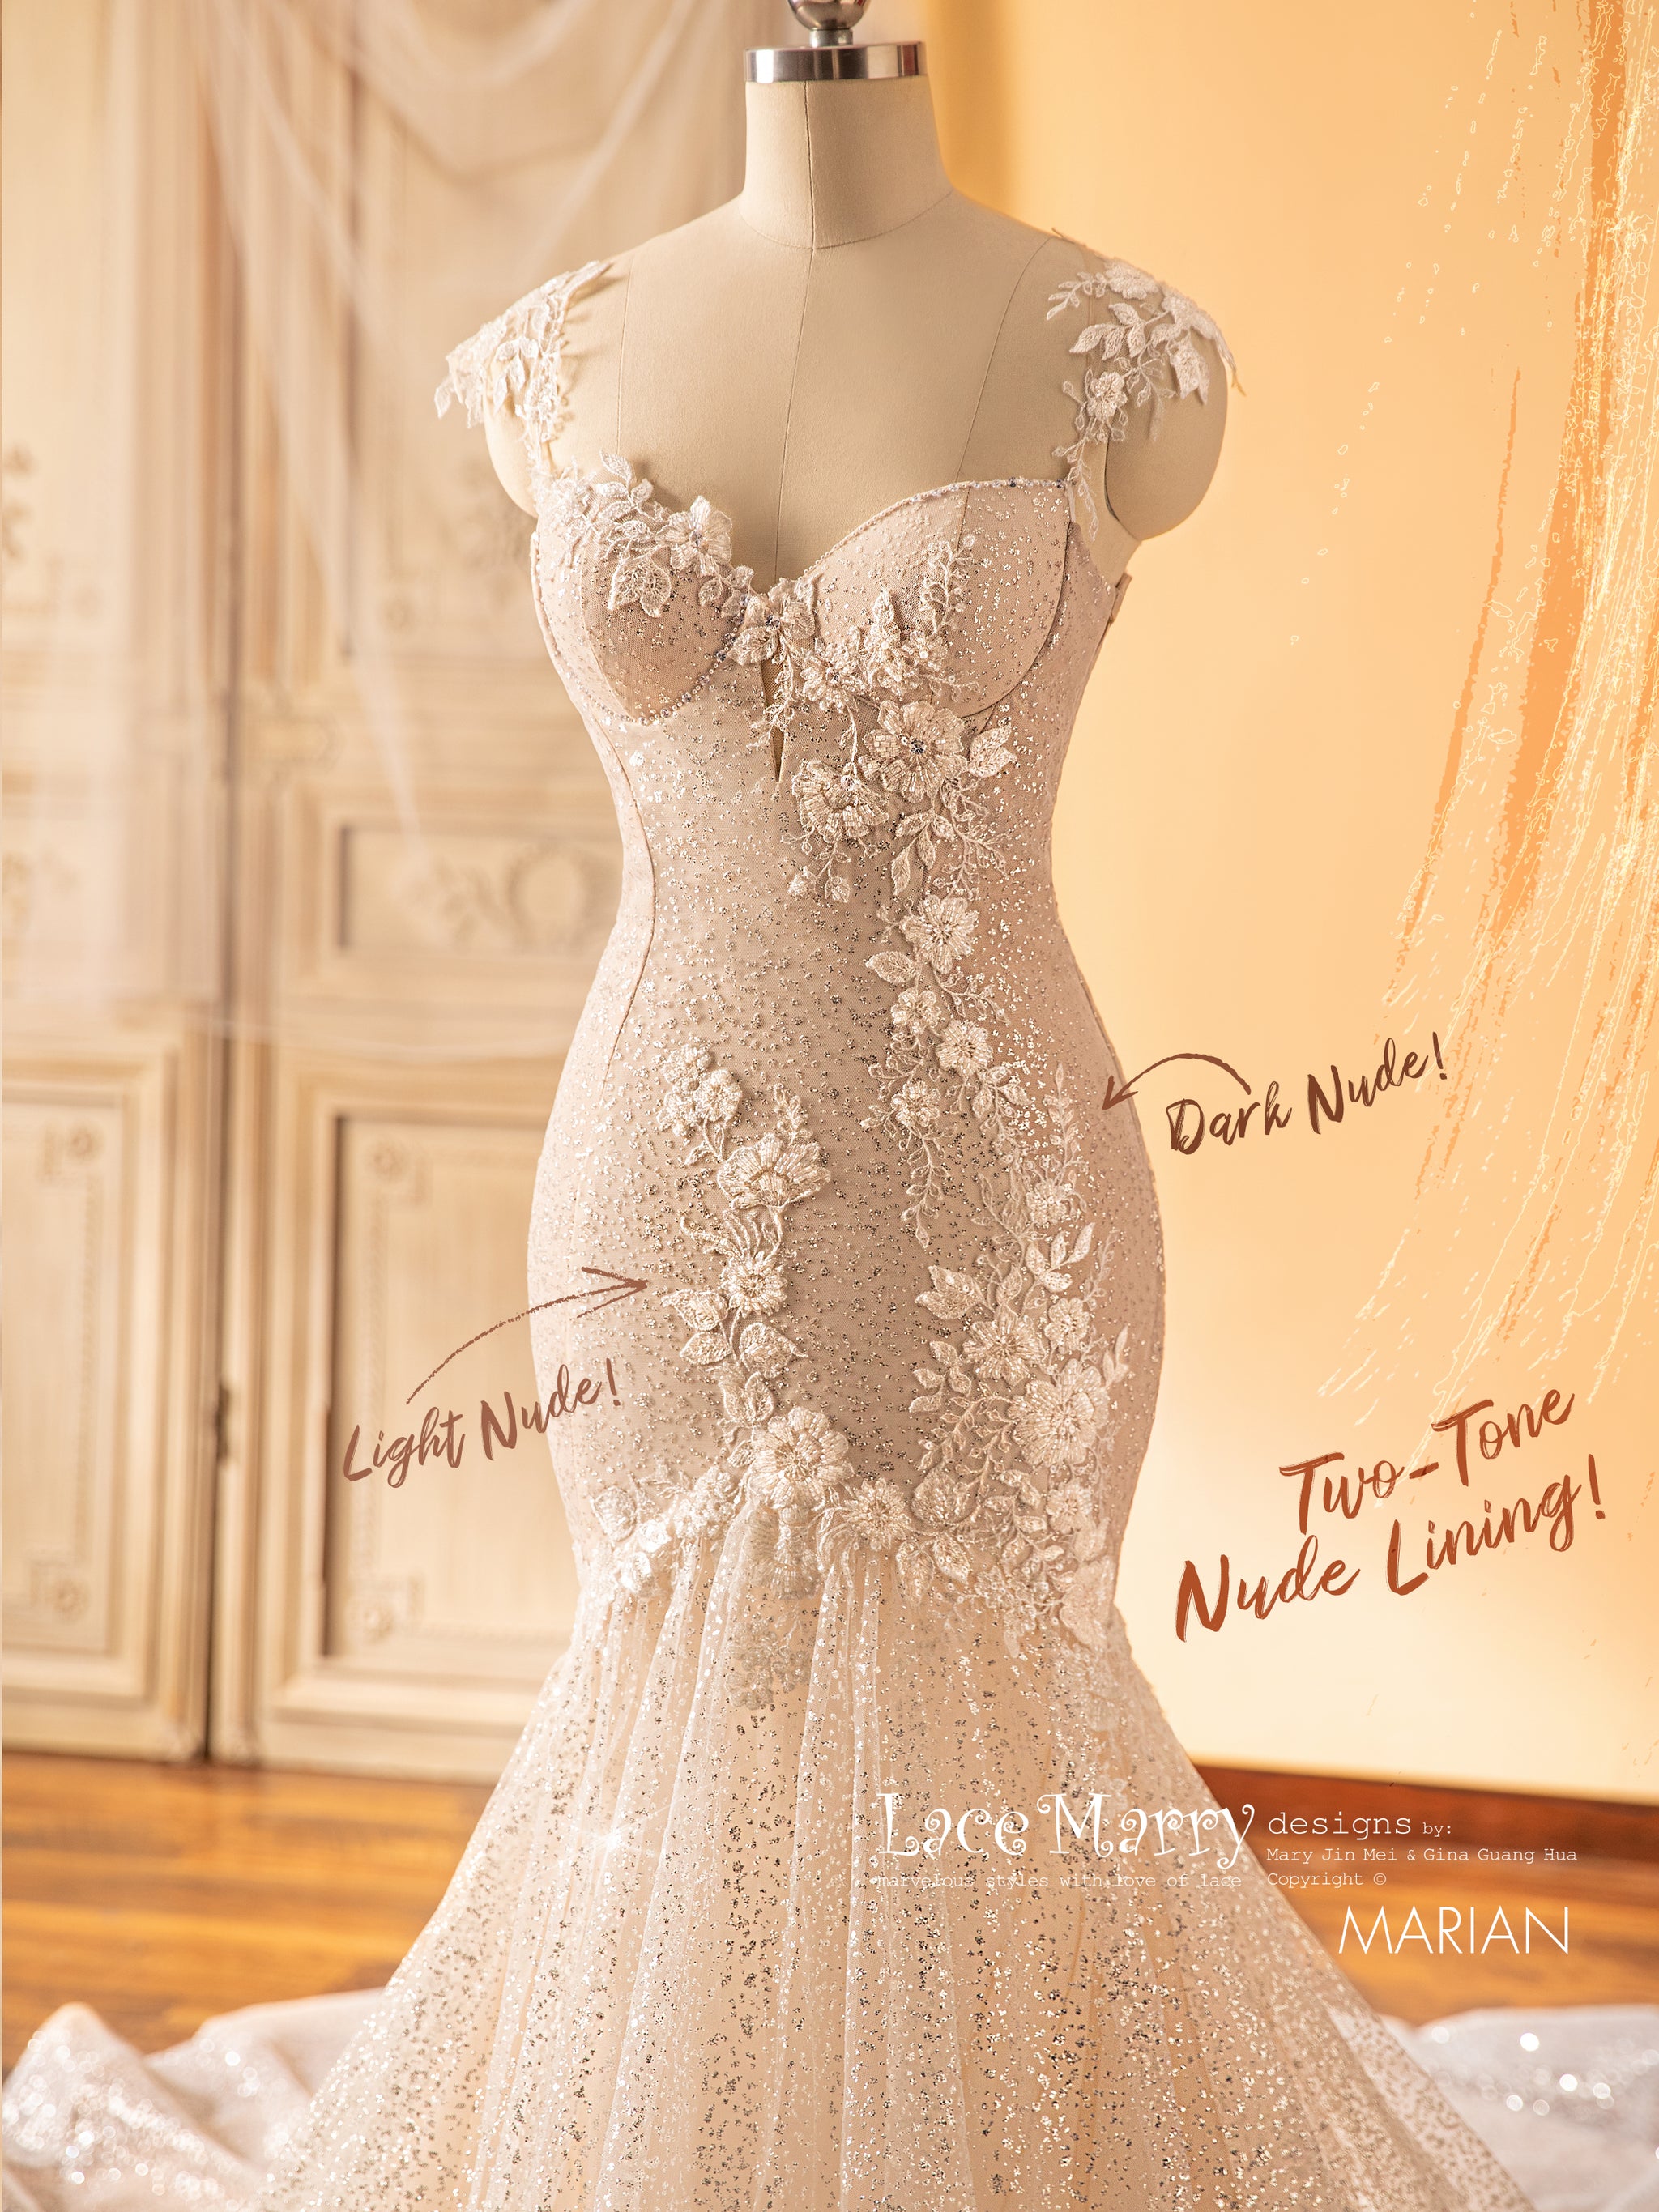 Know The Types Of Lace Work On Wedding Gowns And How To Maintain Them